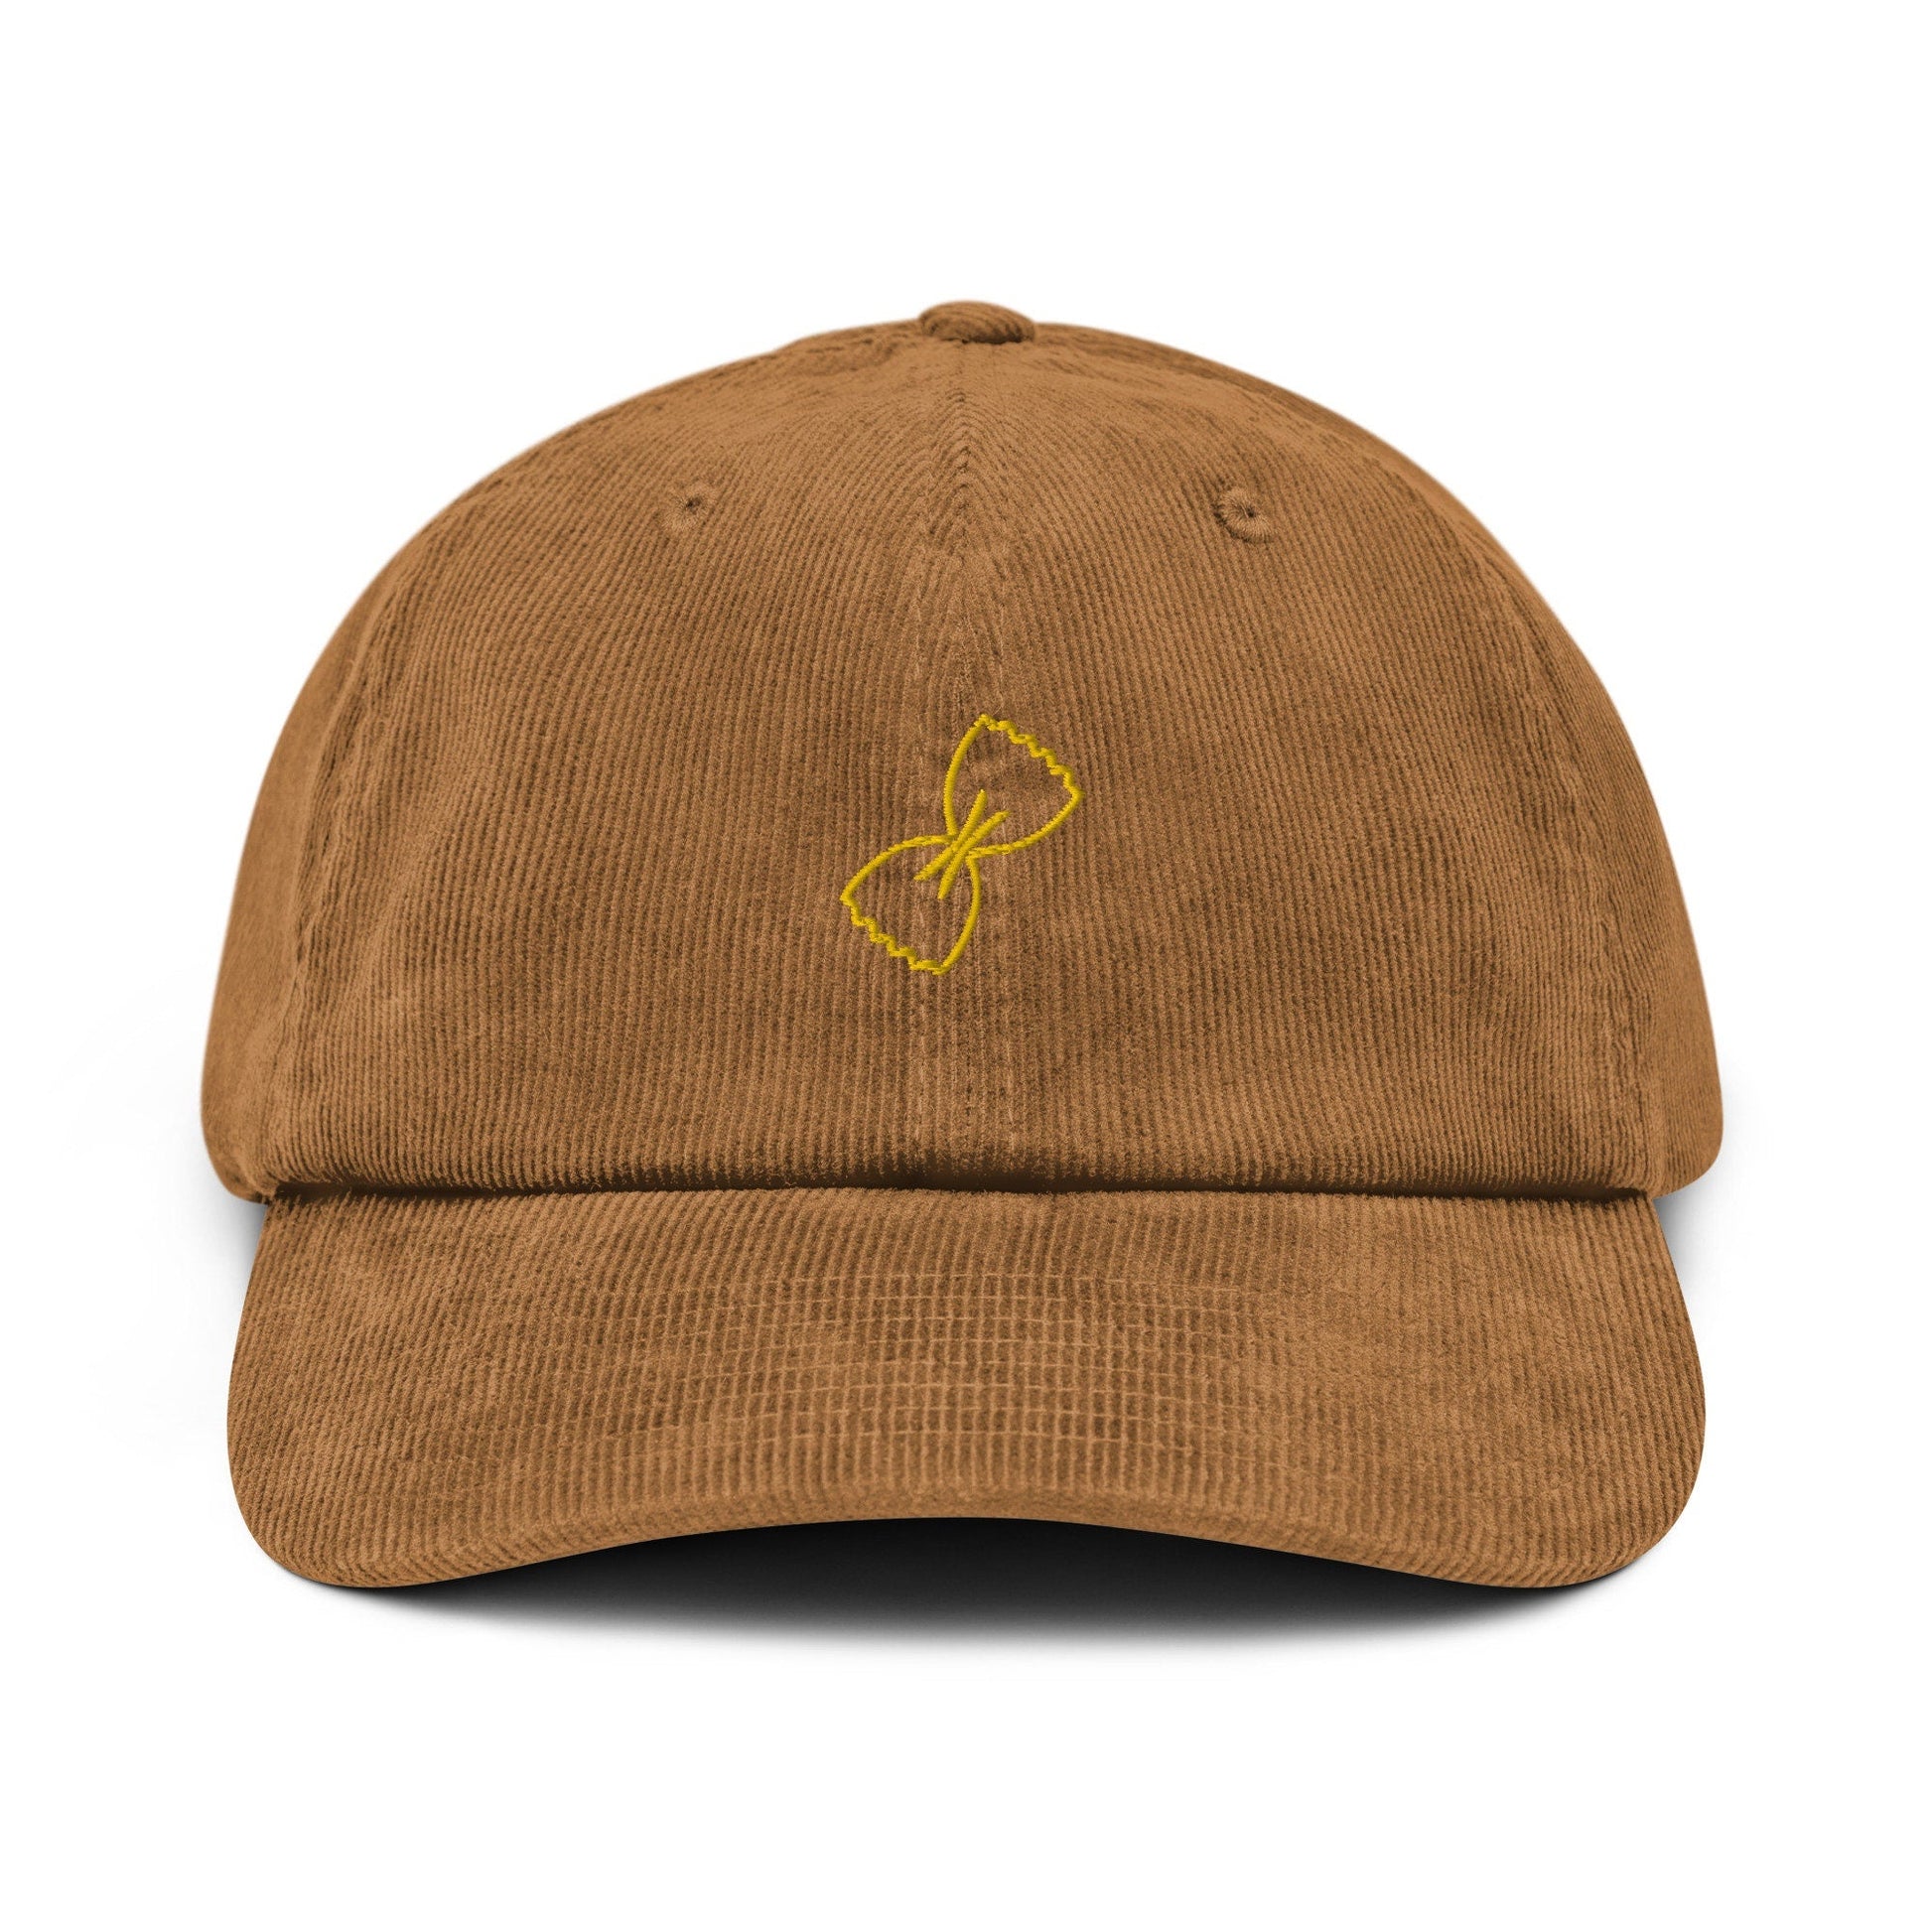 Farfalle Corduroy Dad Hat - Gift for Italian Pasta Lovers - Handmade Embroidered Cap - Evilwater Originals